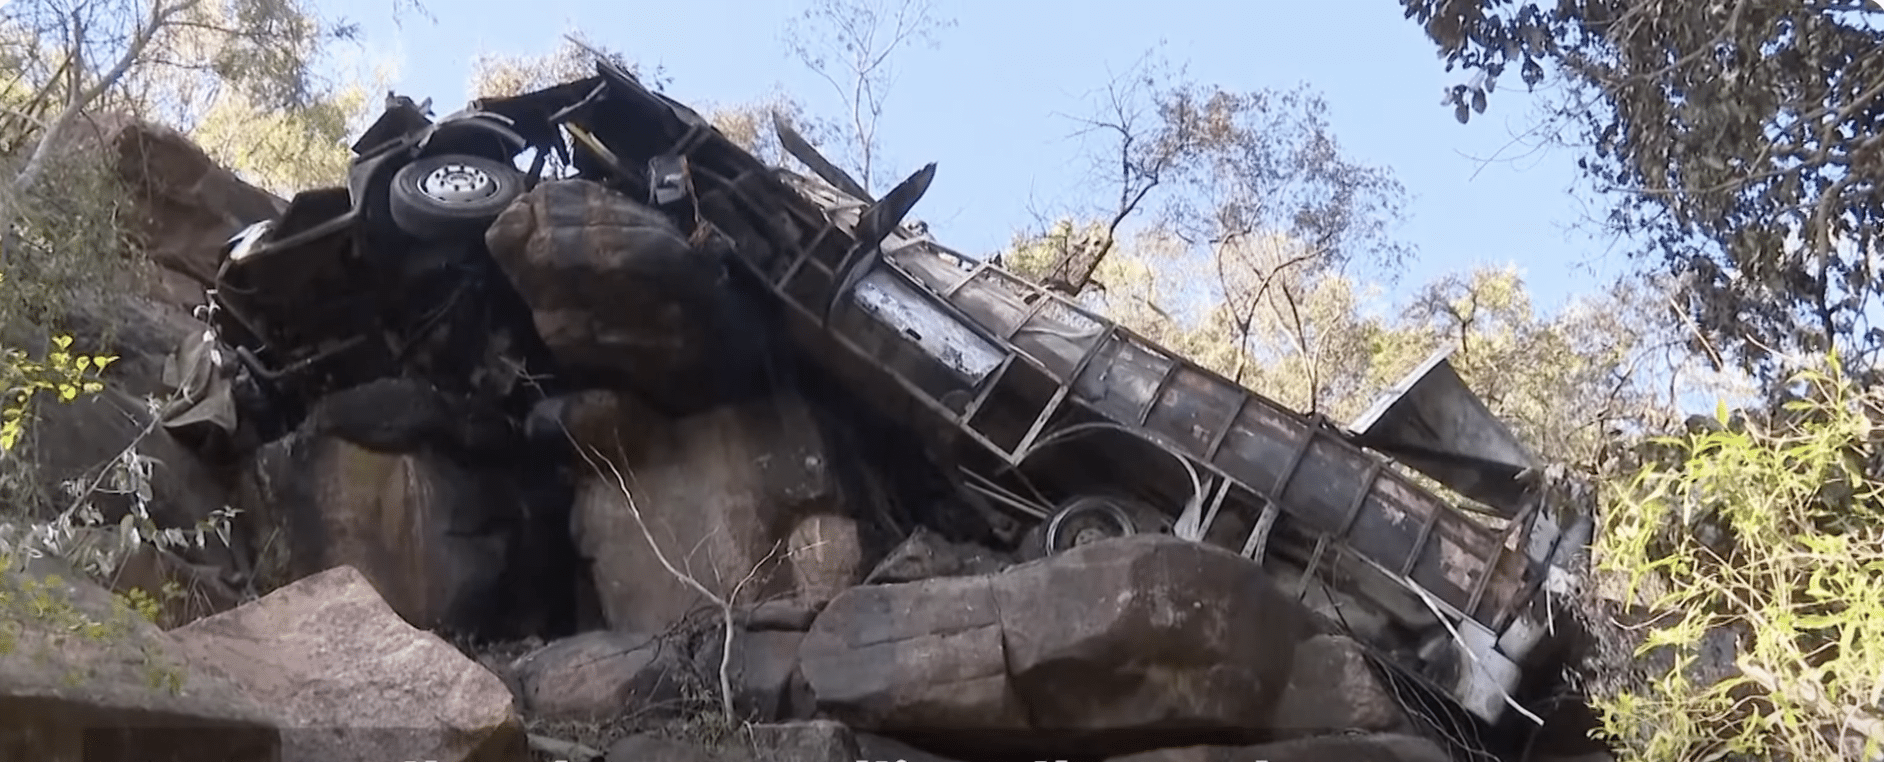 Bus carrying Easter worshipers plunges off bridge killing 45 people in South Africa